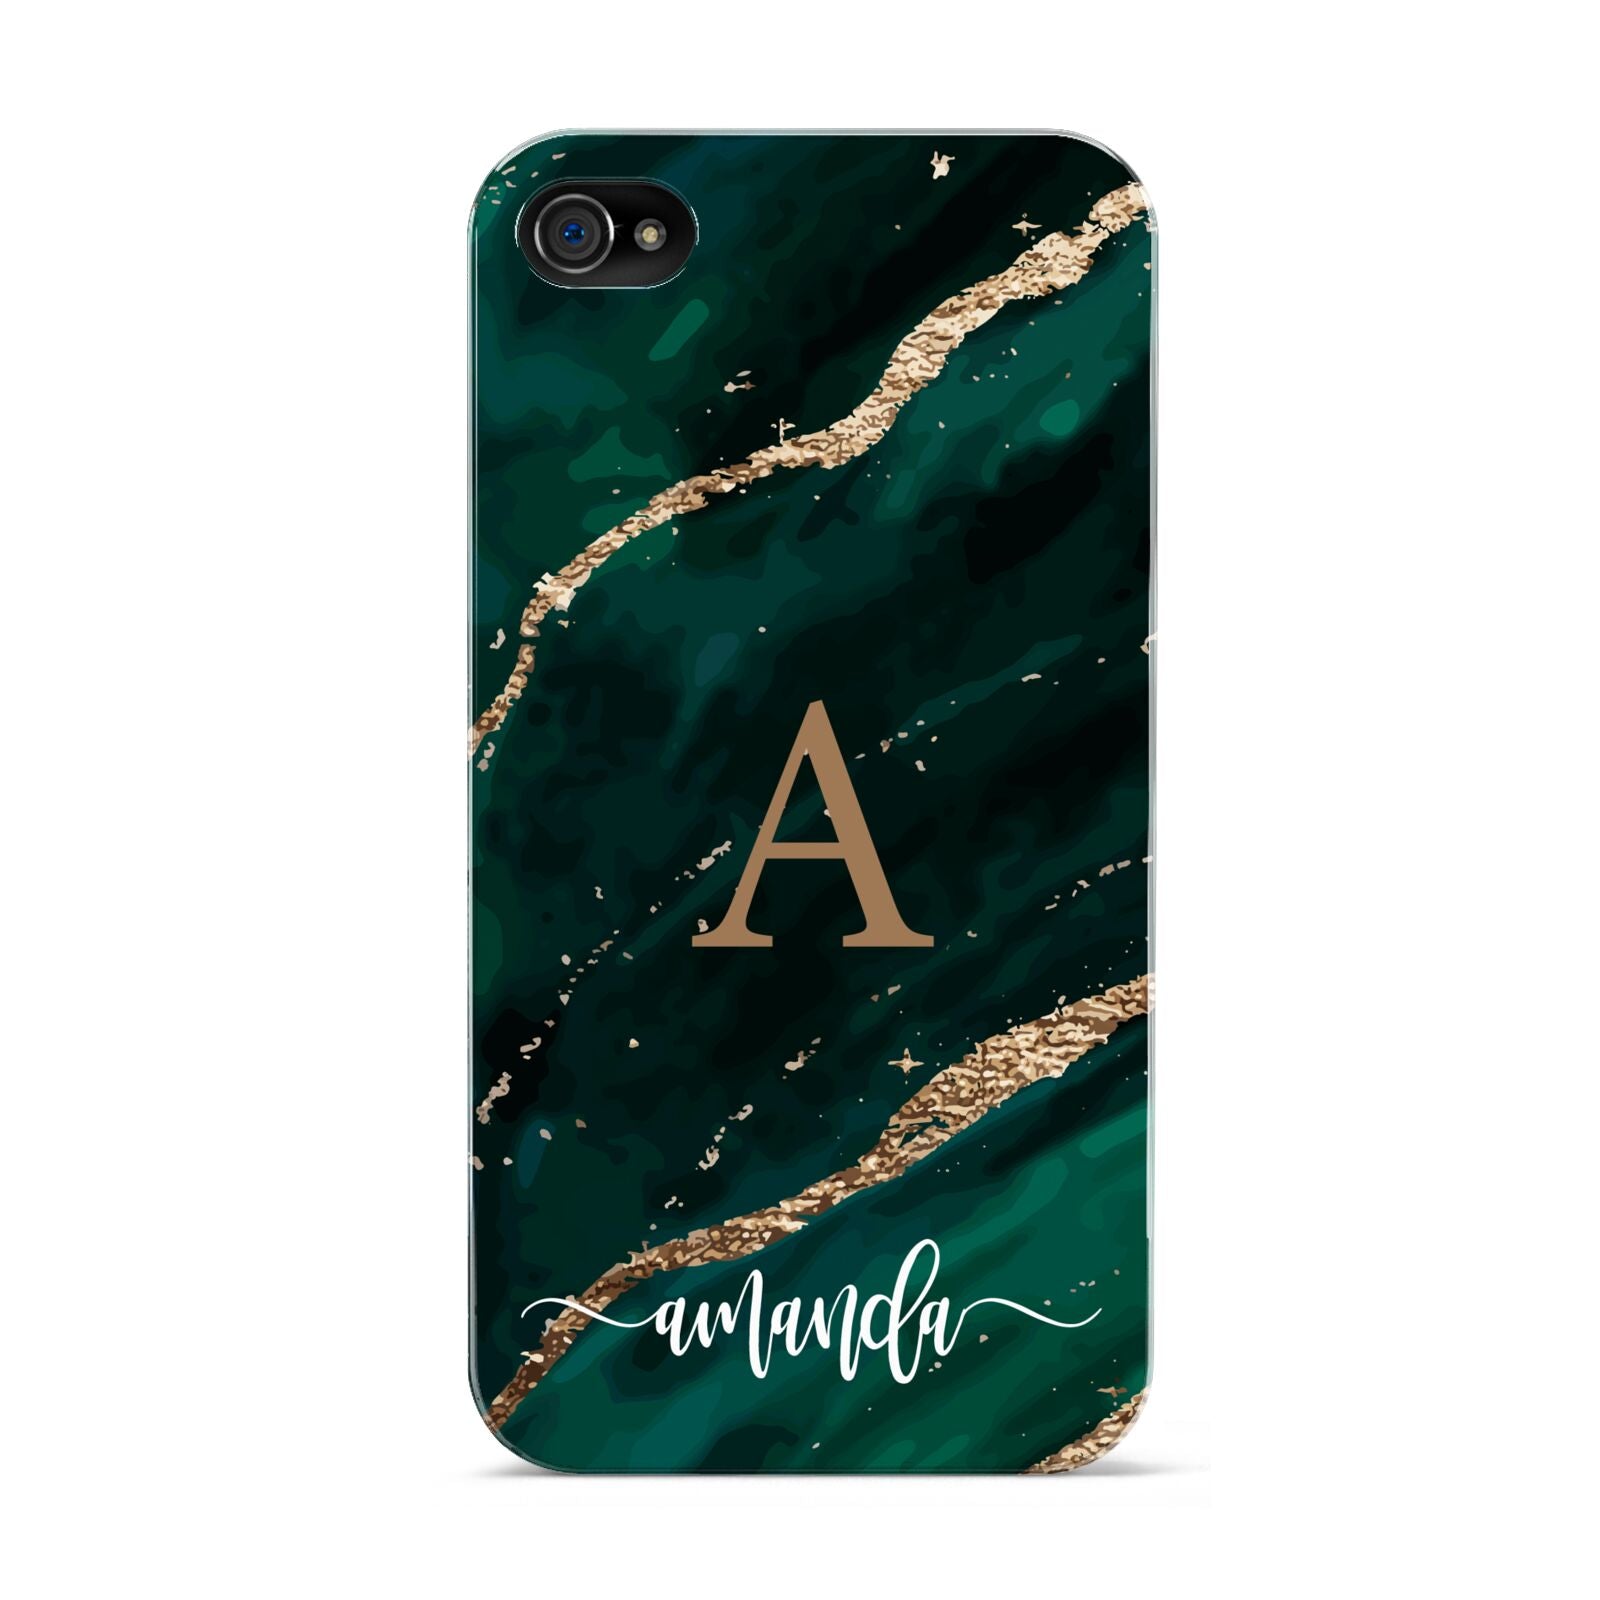 Green Marble Apple iPhone 4s Case